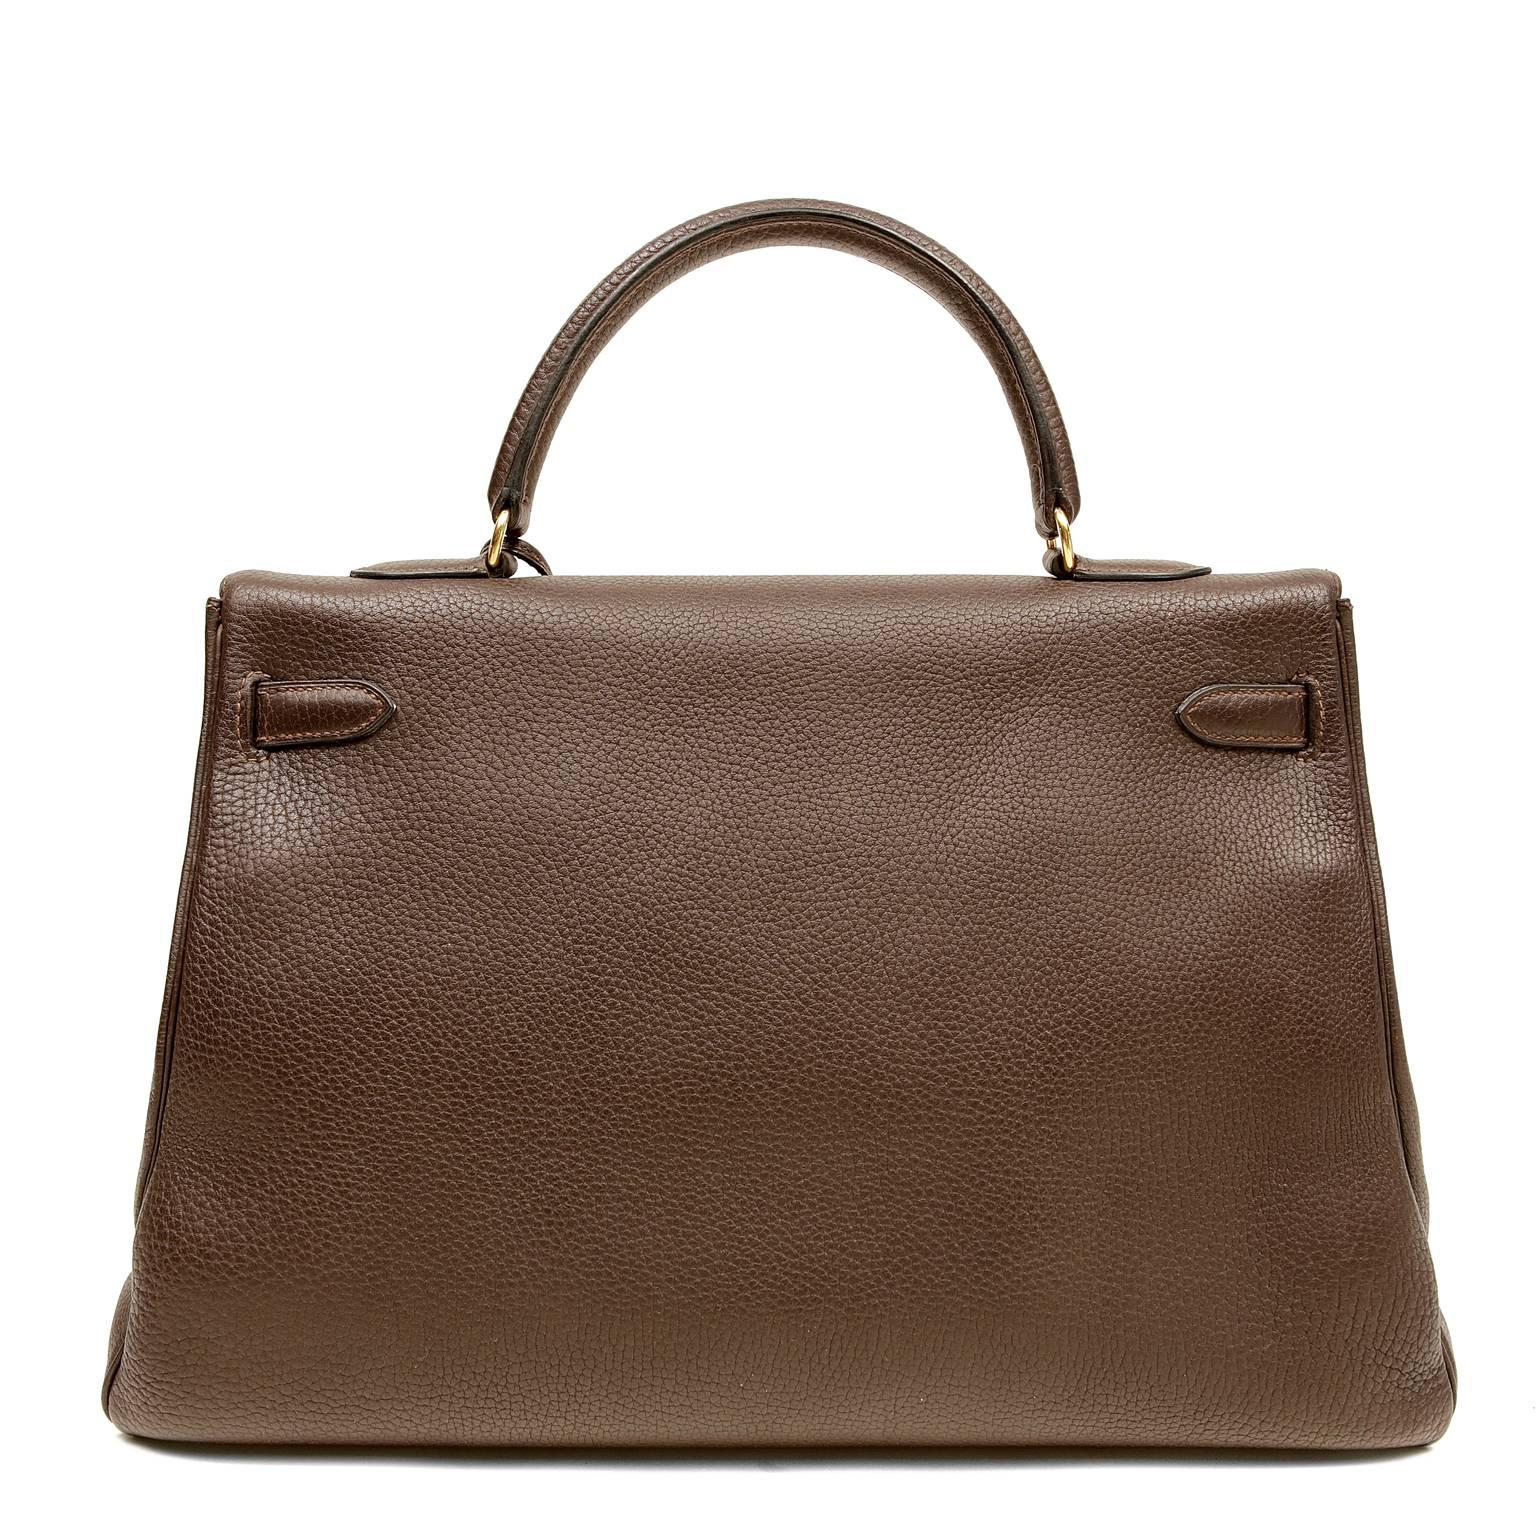 Hermès Chocolate Togo 35 cm Kelly- Excellent Condition
 Hermès bags are considered the ultimate luxury item worldwide.  Each piece is handcrafted with waitlists that can exceed a year or more.  The ladylike Kelly is classic and refined, a